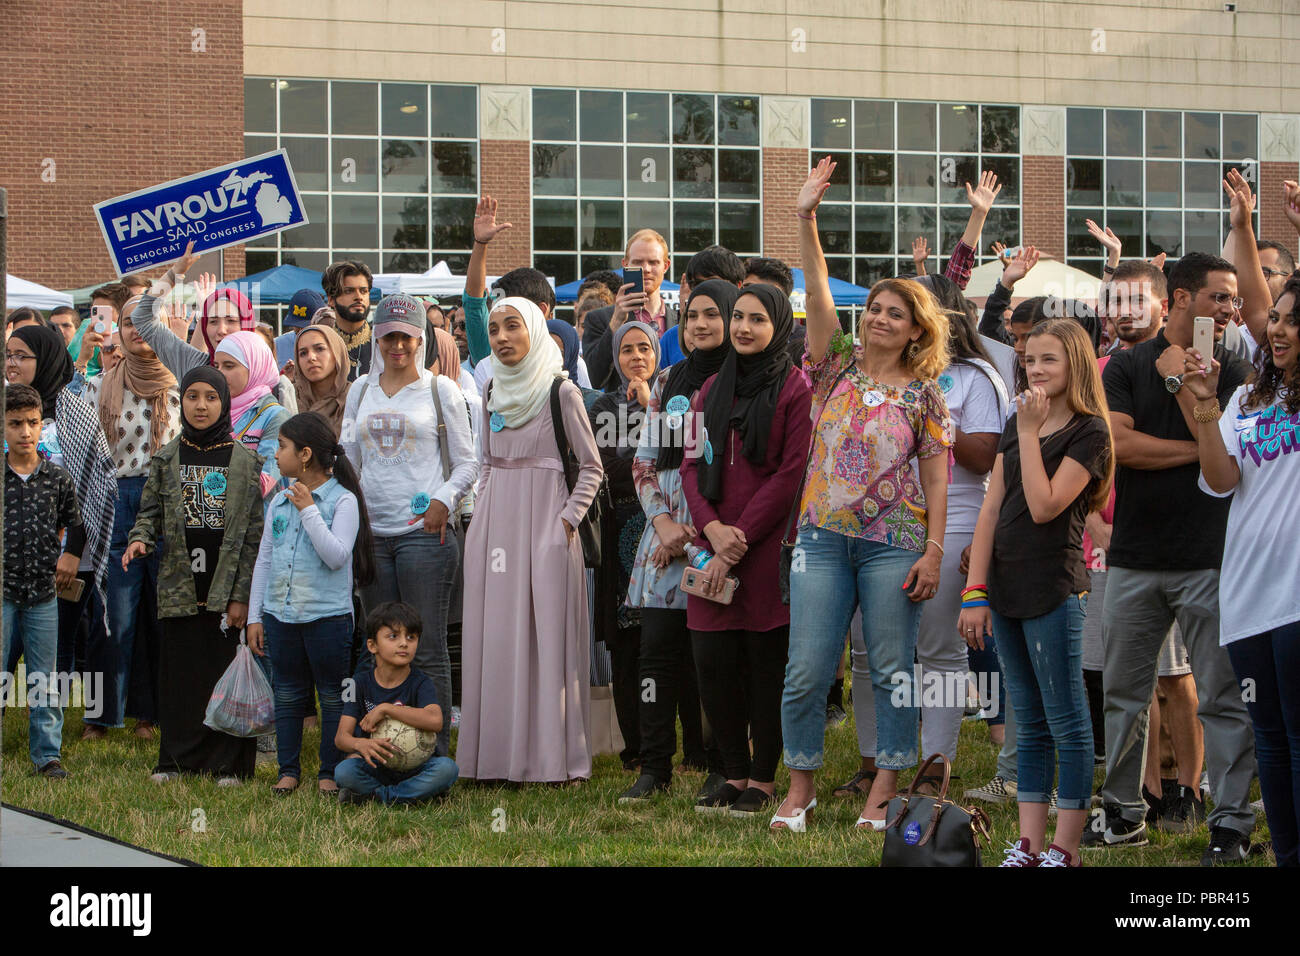 Dearborn, Michigan USA - 29 July 2018 - A Muslim Get Out the Vote rally, sponsored by several Muslim community organizations. The rally featured entertainment and speeches from Muslim and other progressive political candidates. Credit: Jim West/Alamy Live News Stock Photo